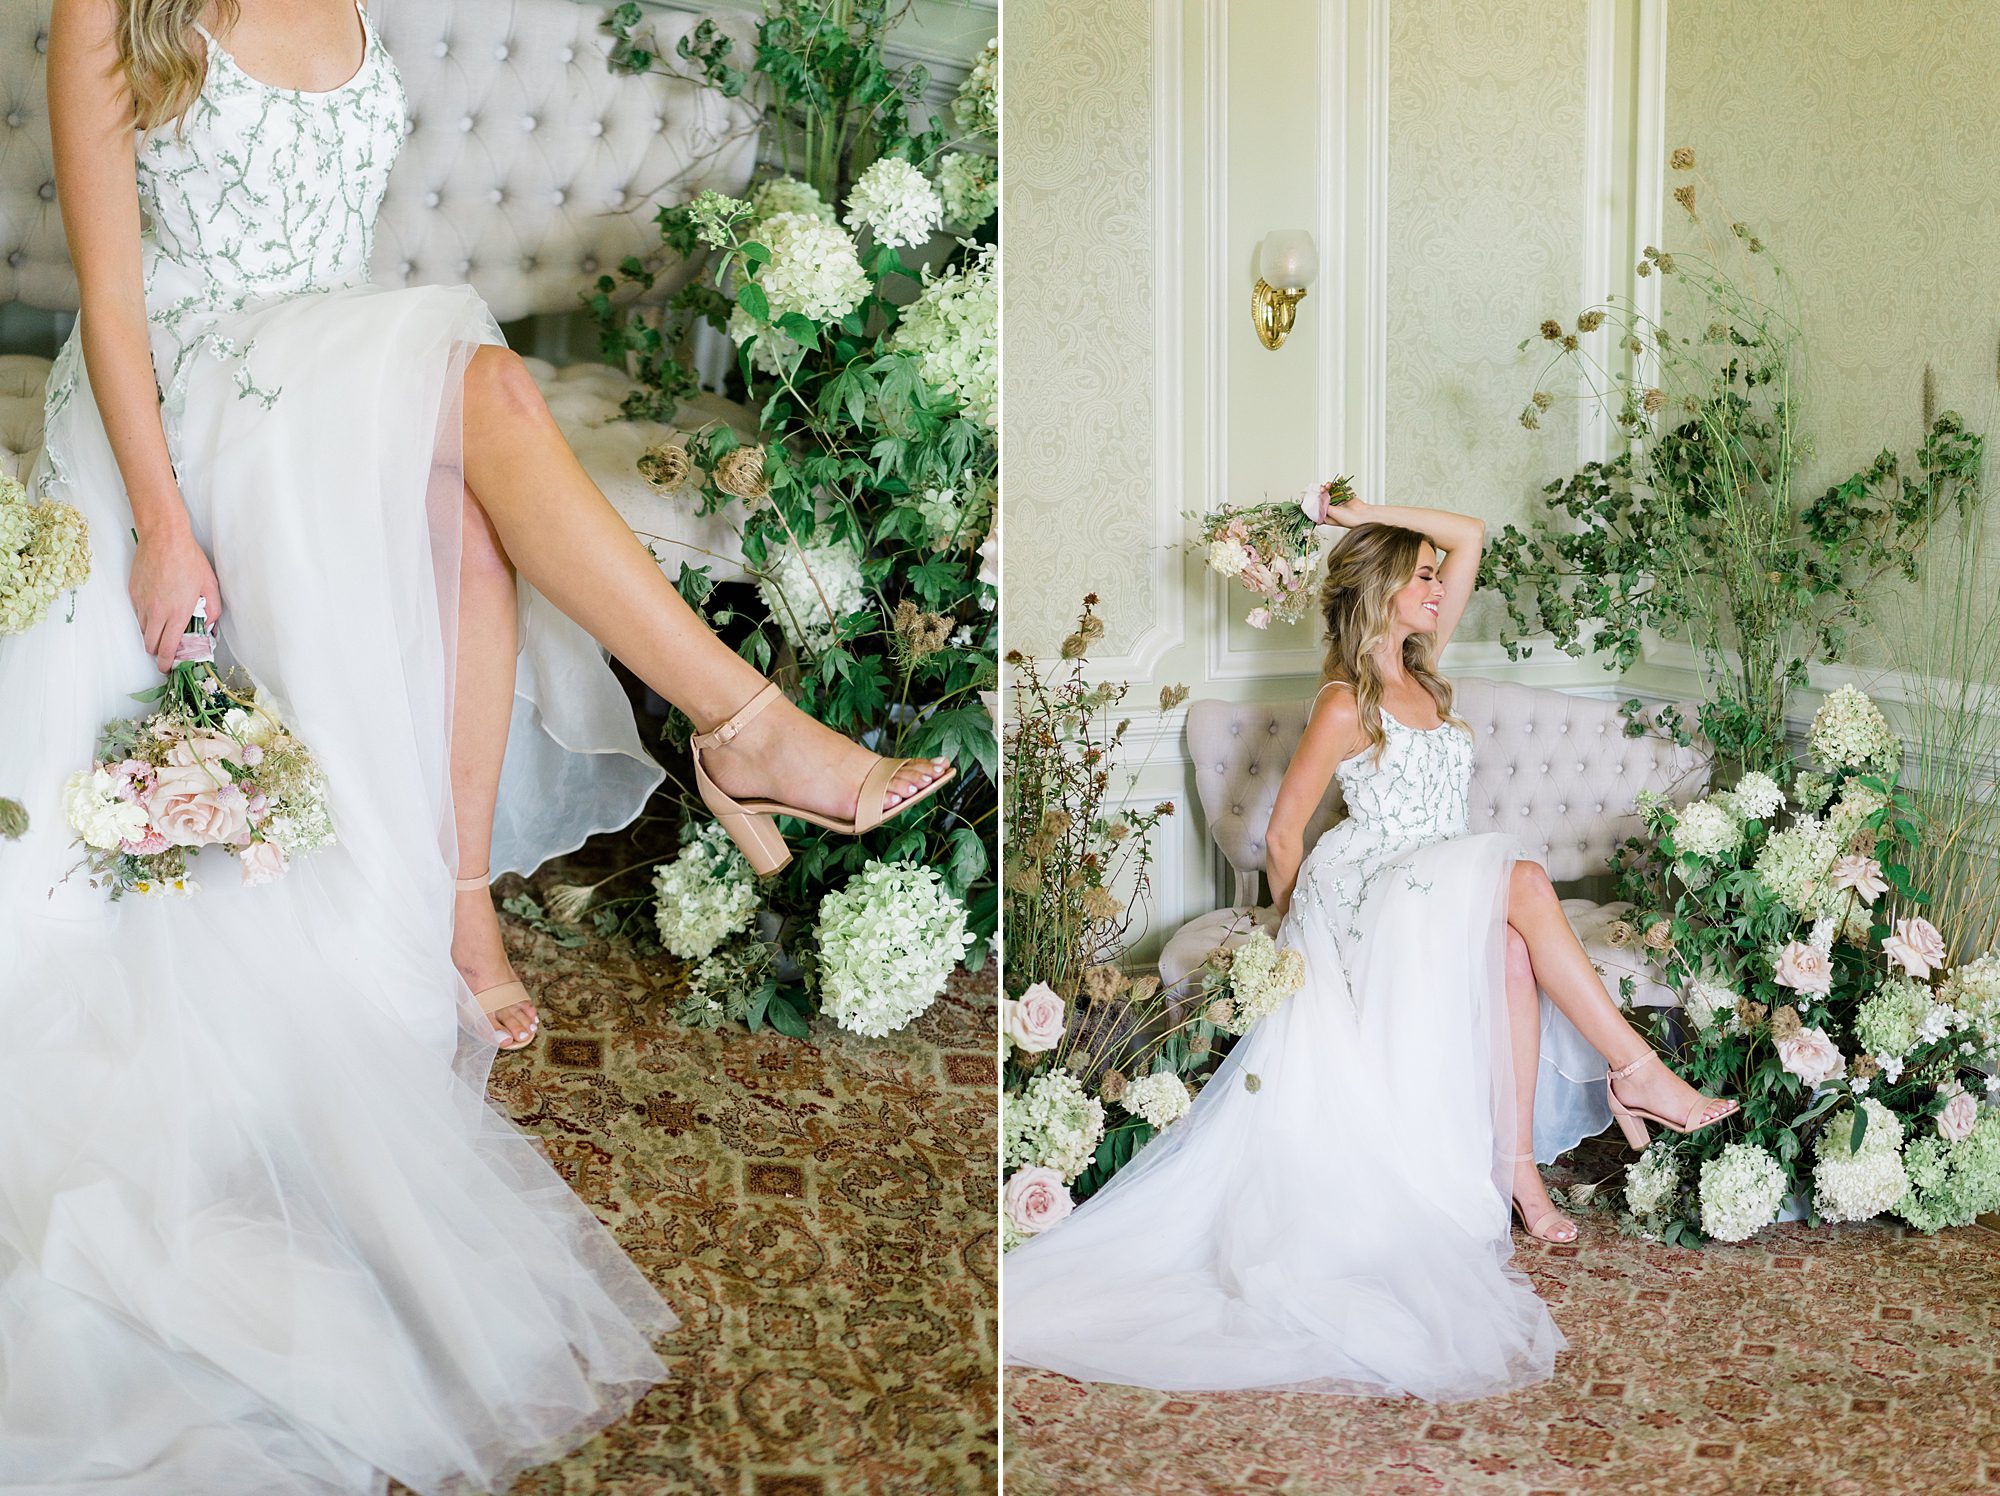 wedding shoes and bride's wedding dress from Secret Garden inspired Bridal Portraits